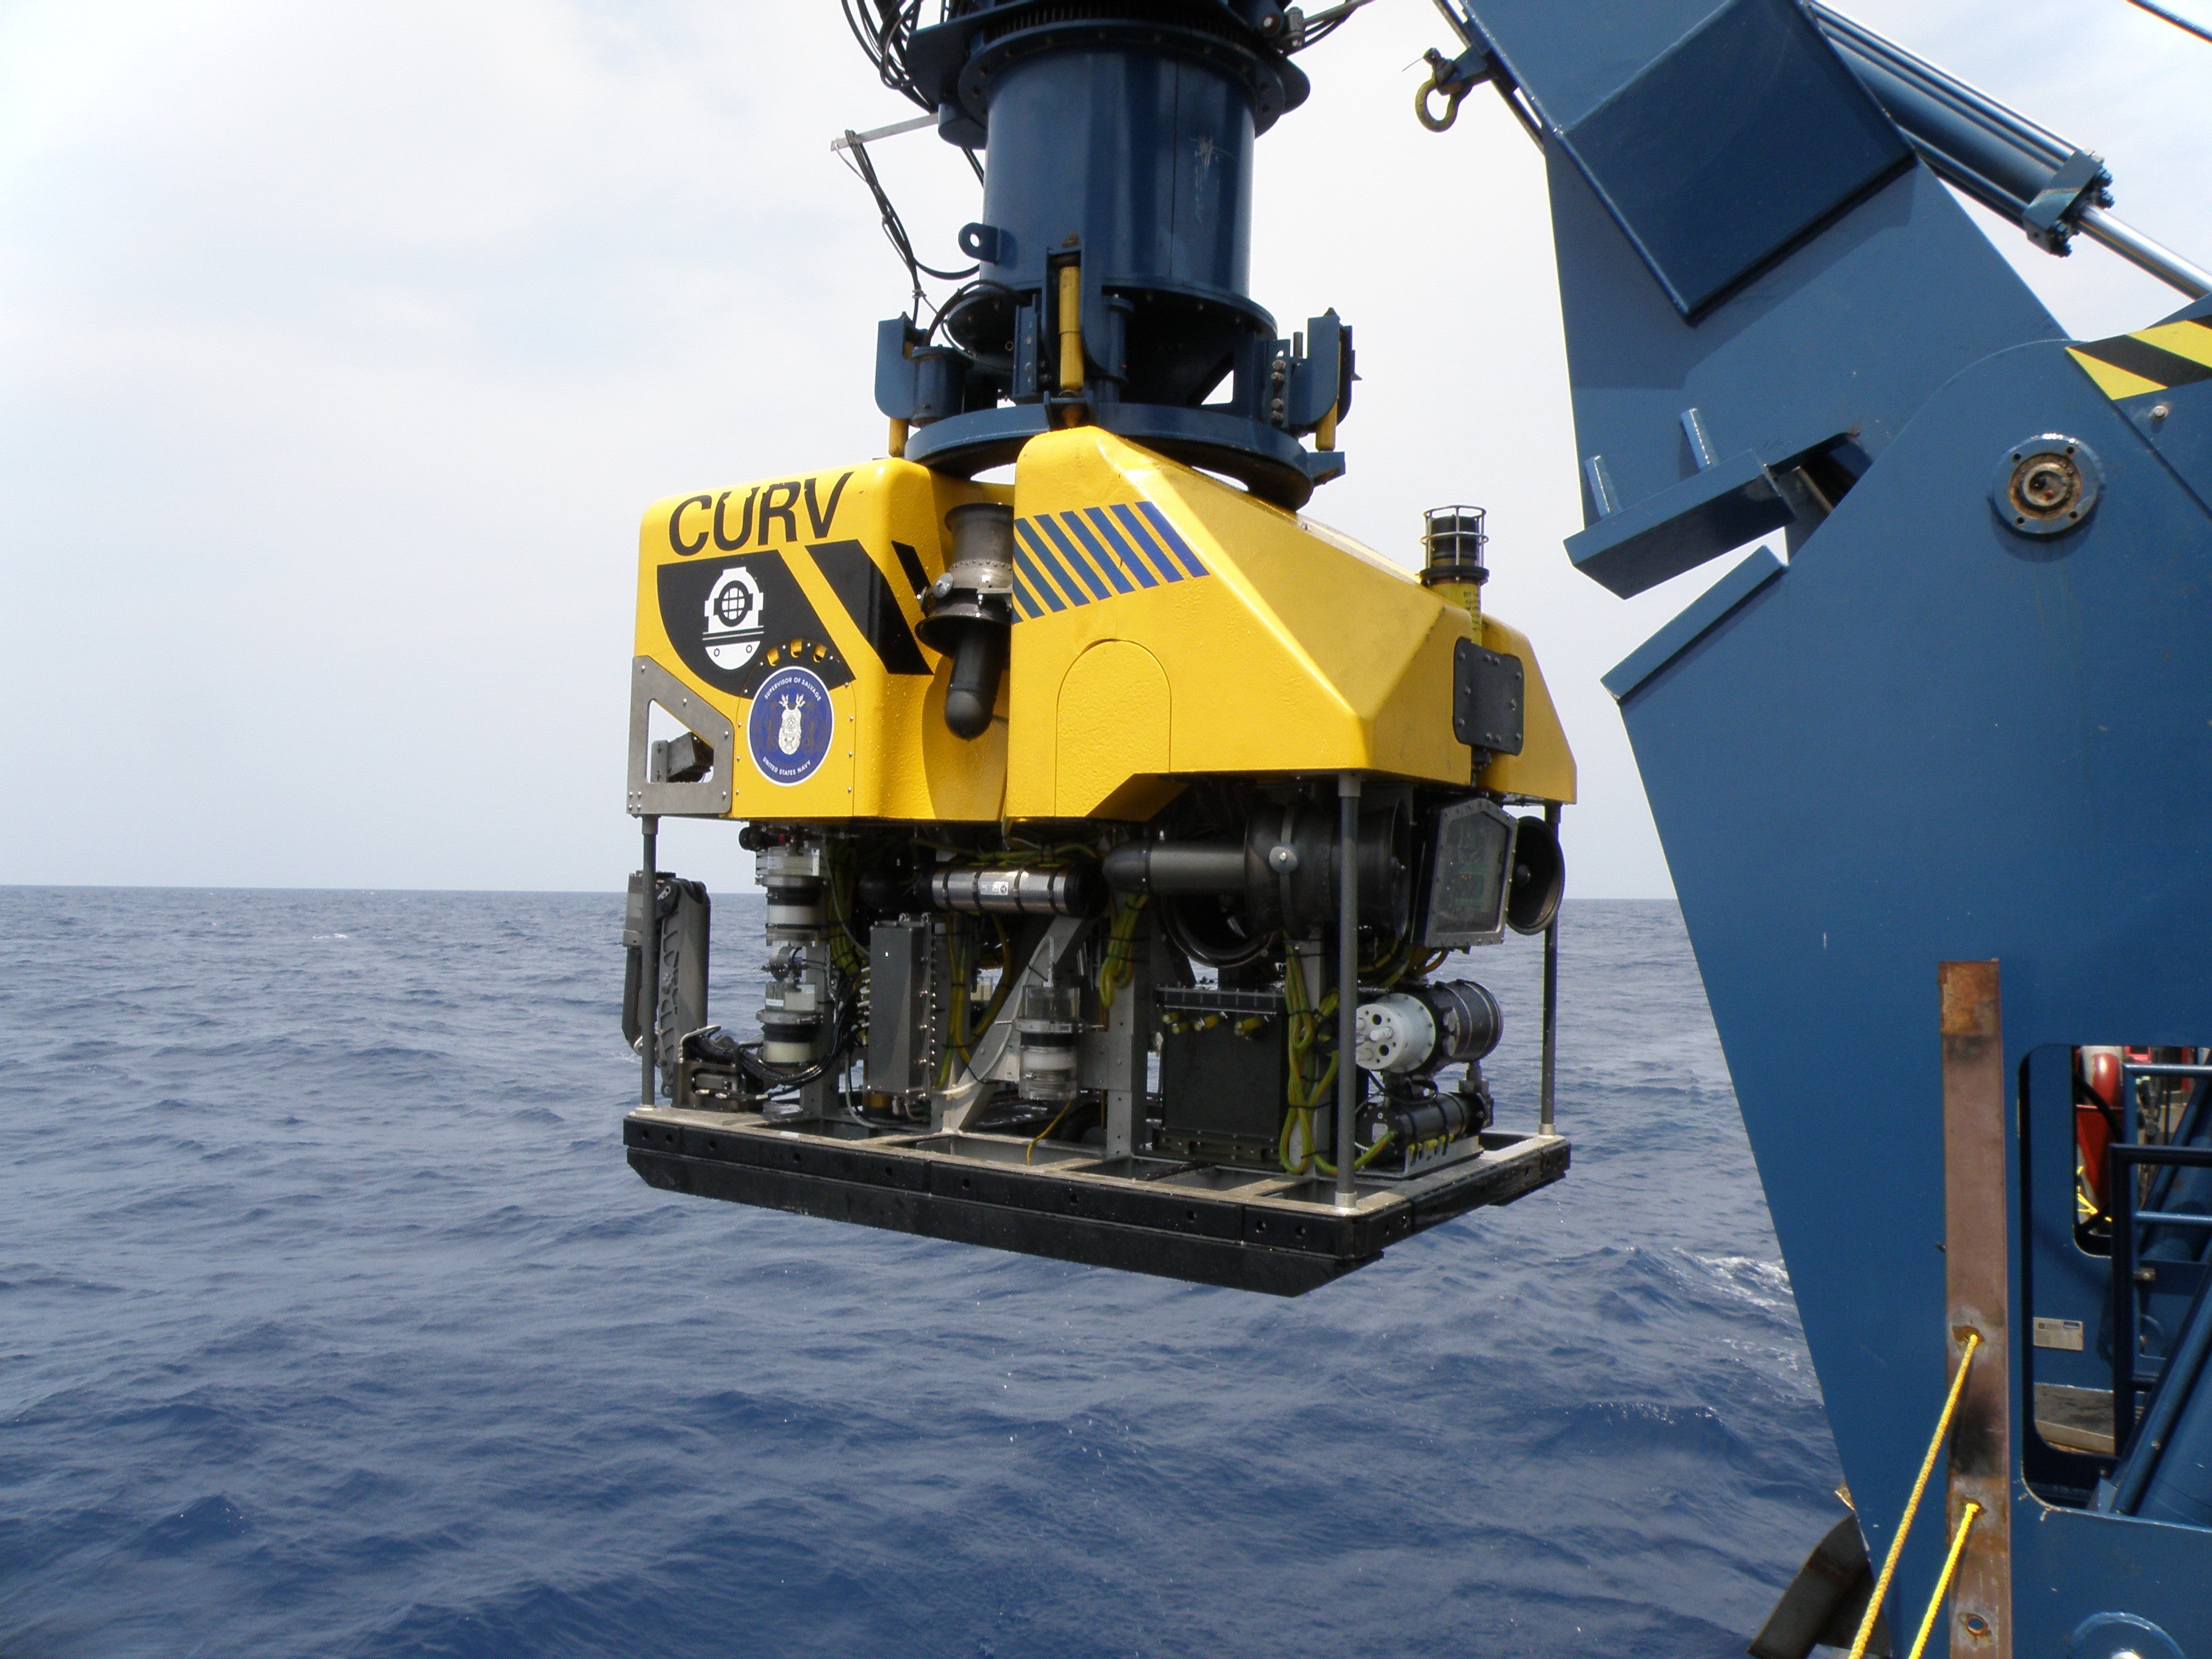 <p>A US Navy Curv-21, an unmanned submersible vessel that can reach a depth of 20,000 feet, is being used in the search for the missing Titanic wreck vessel</p>